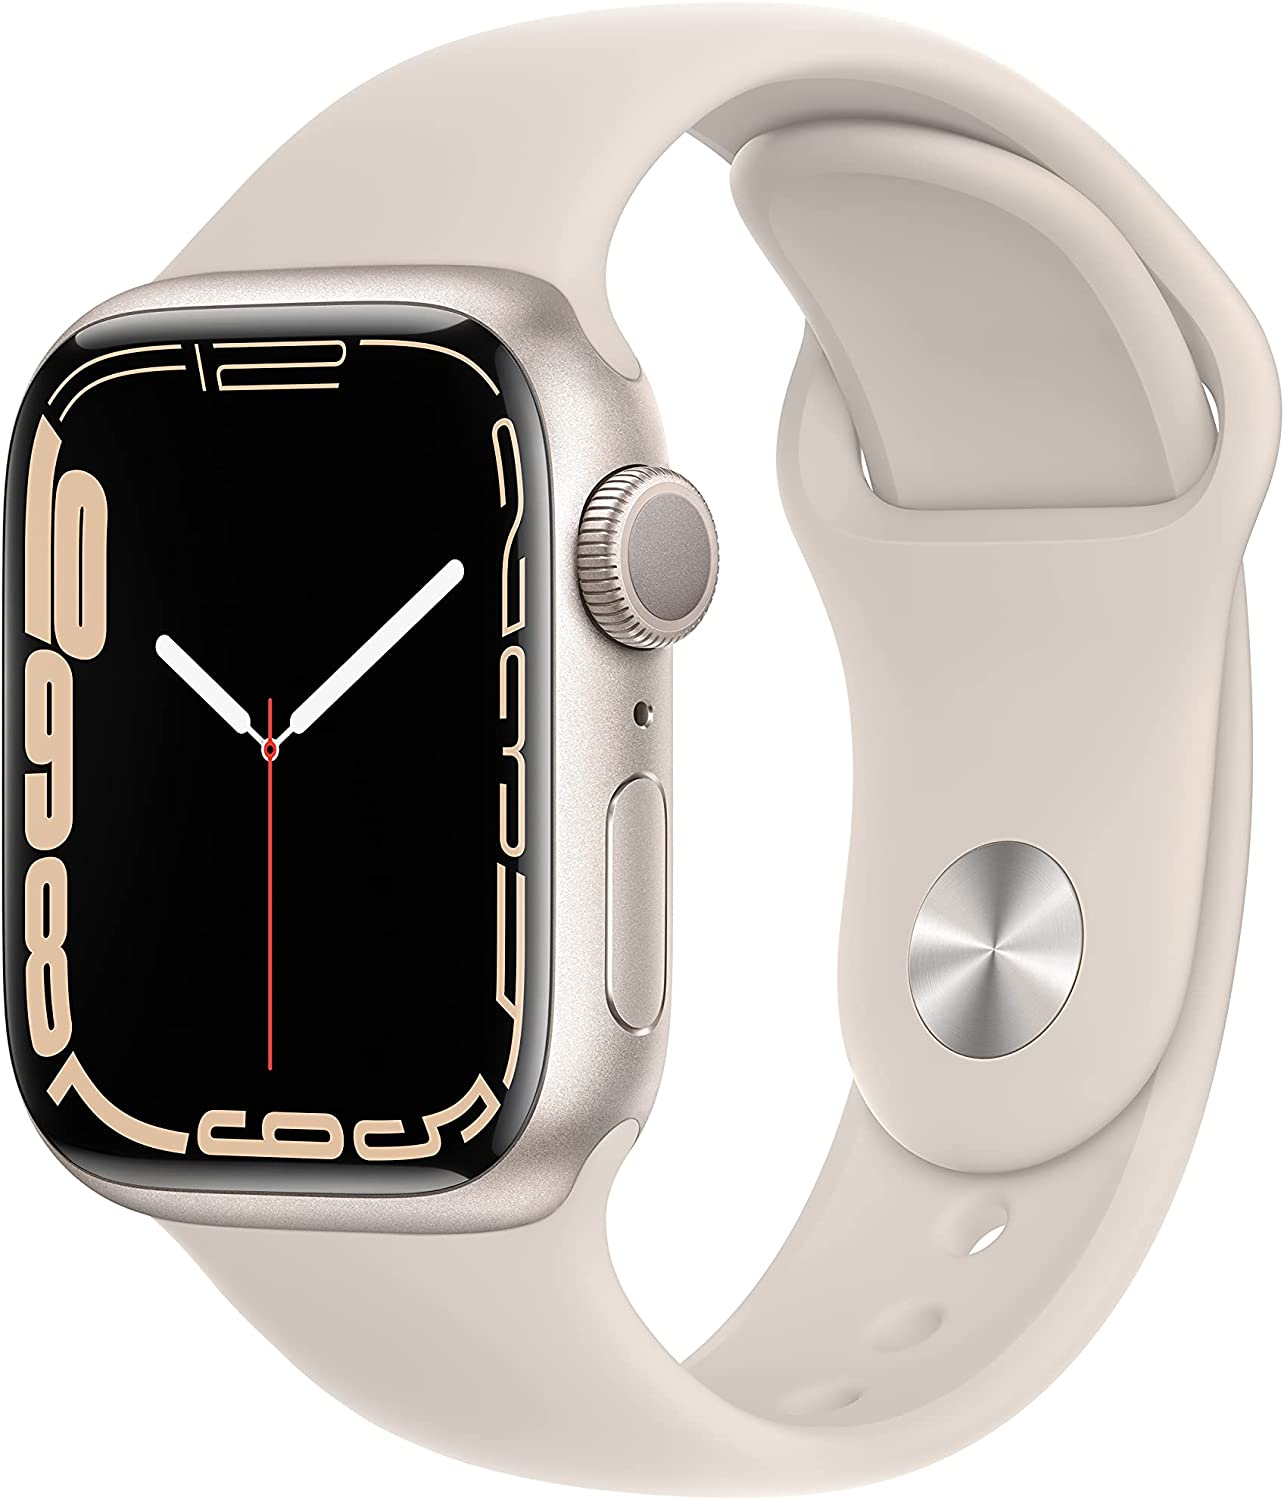 Series 7 apple watch with cream color sport band